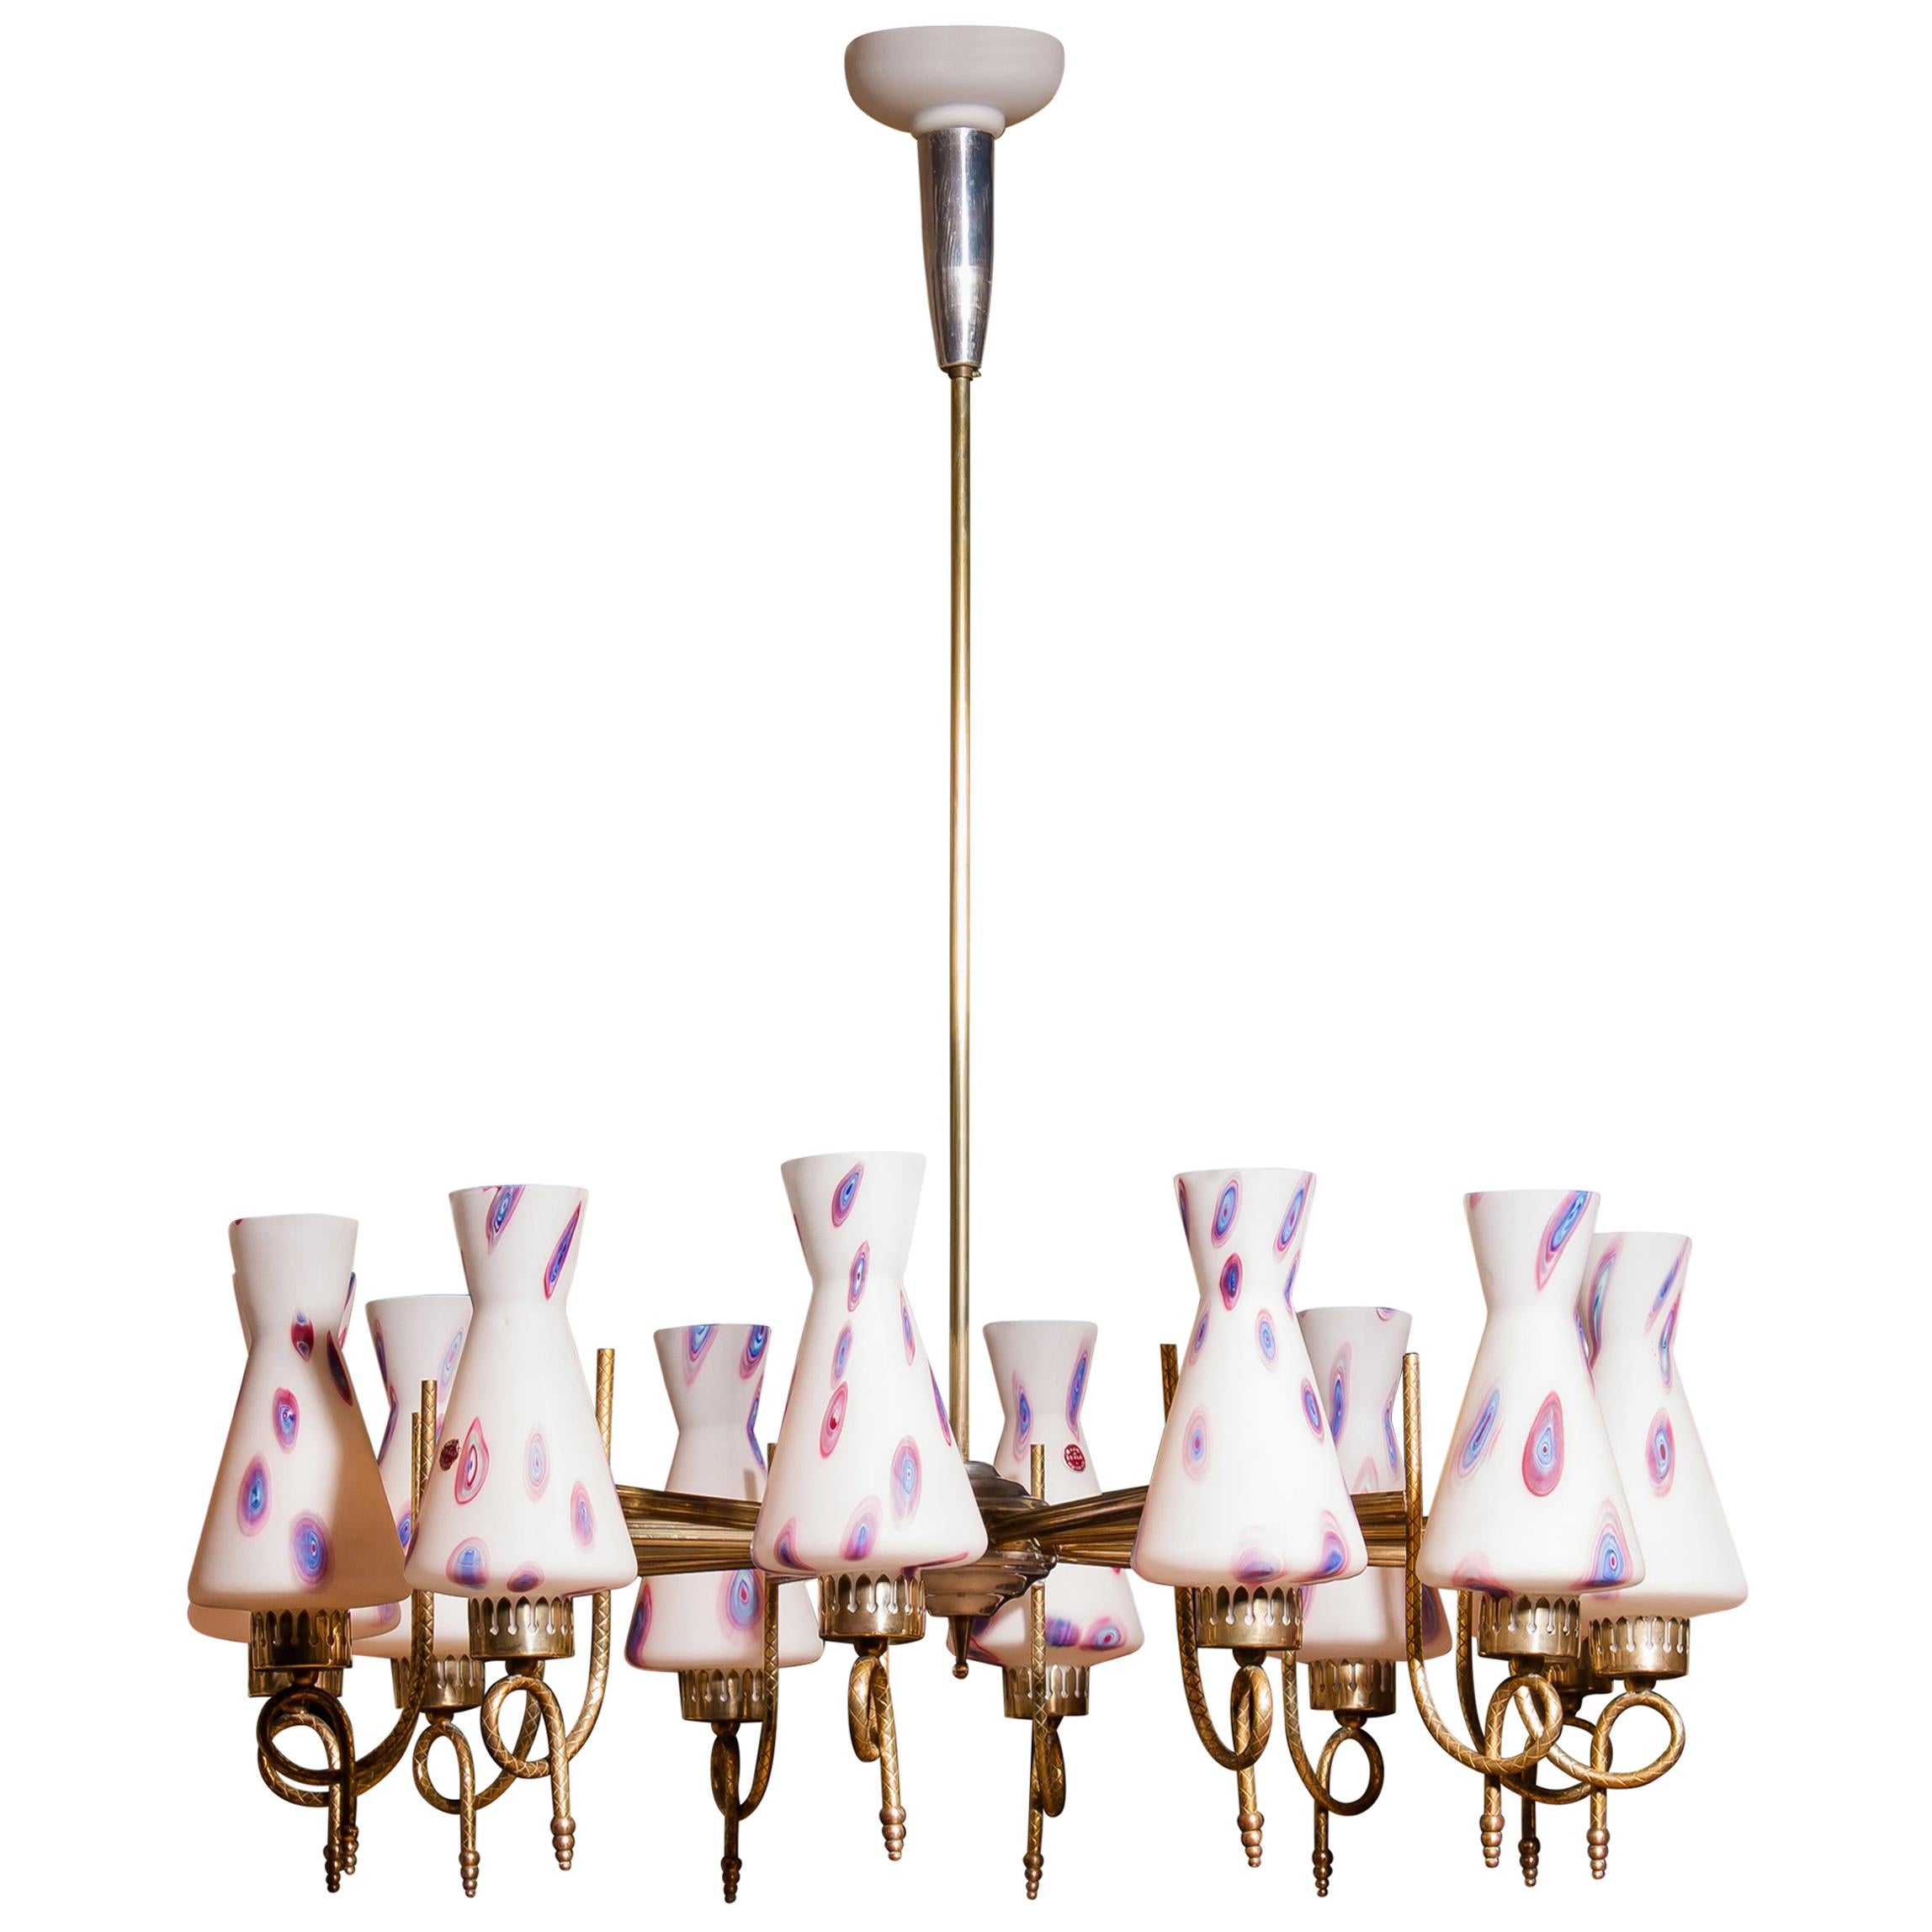 Magnificent large chandelier.
This lamp is made of a beautiful brass with polished aluminium shape with twelve white designed Murano glass shades.
The shades are labelled.
It is in an excellent working condition.
Period 1940s.
Dimensions: H 90